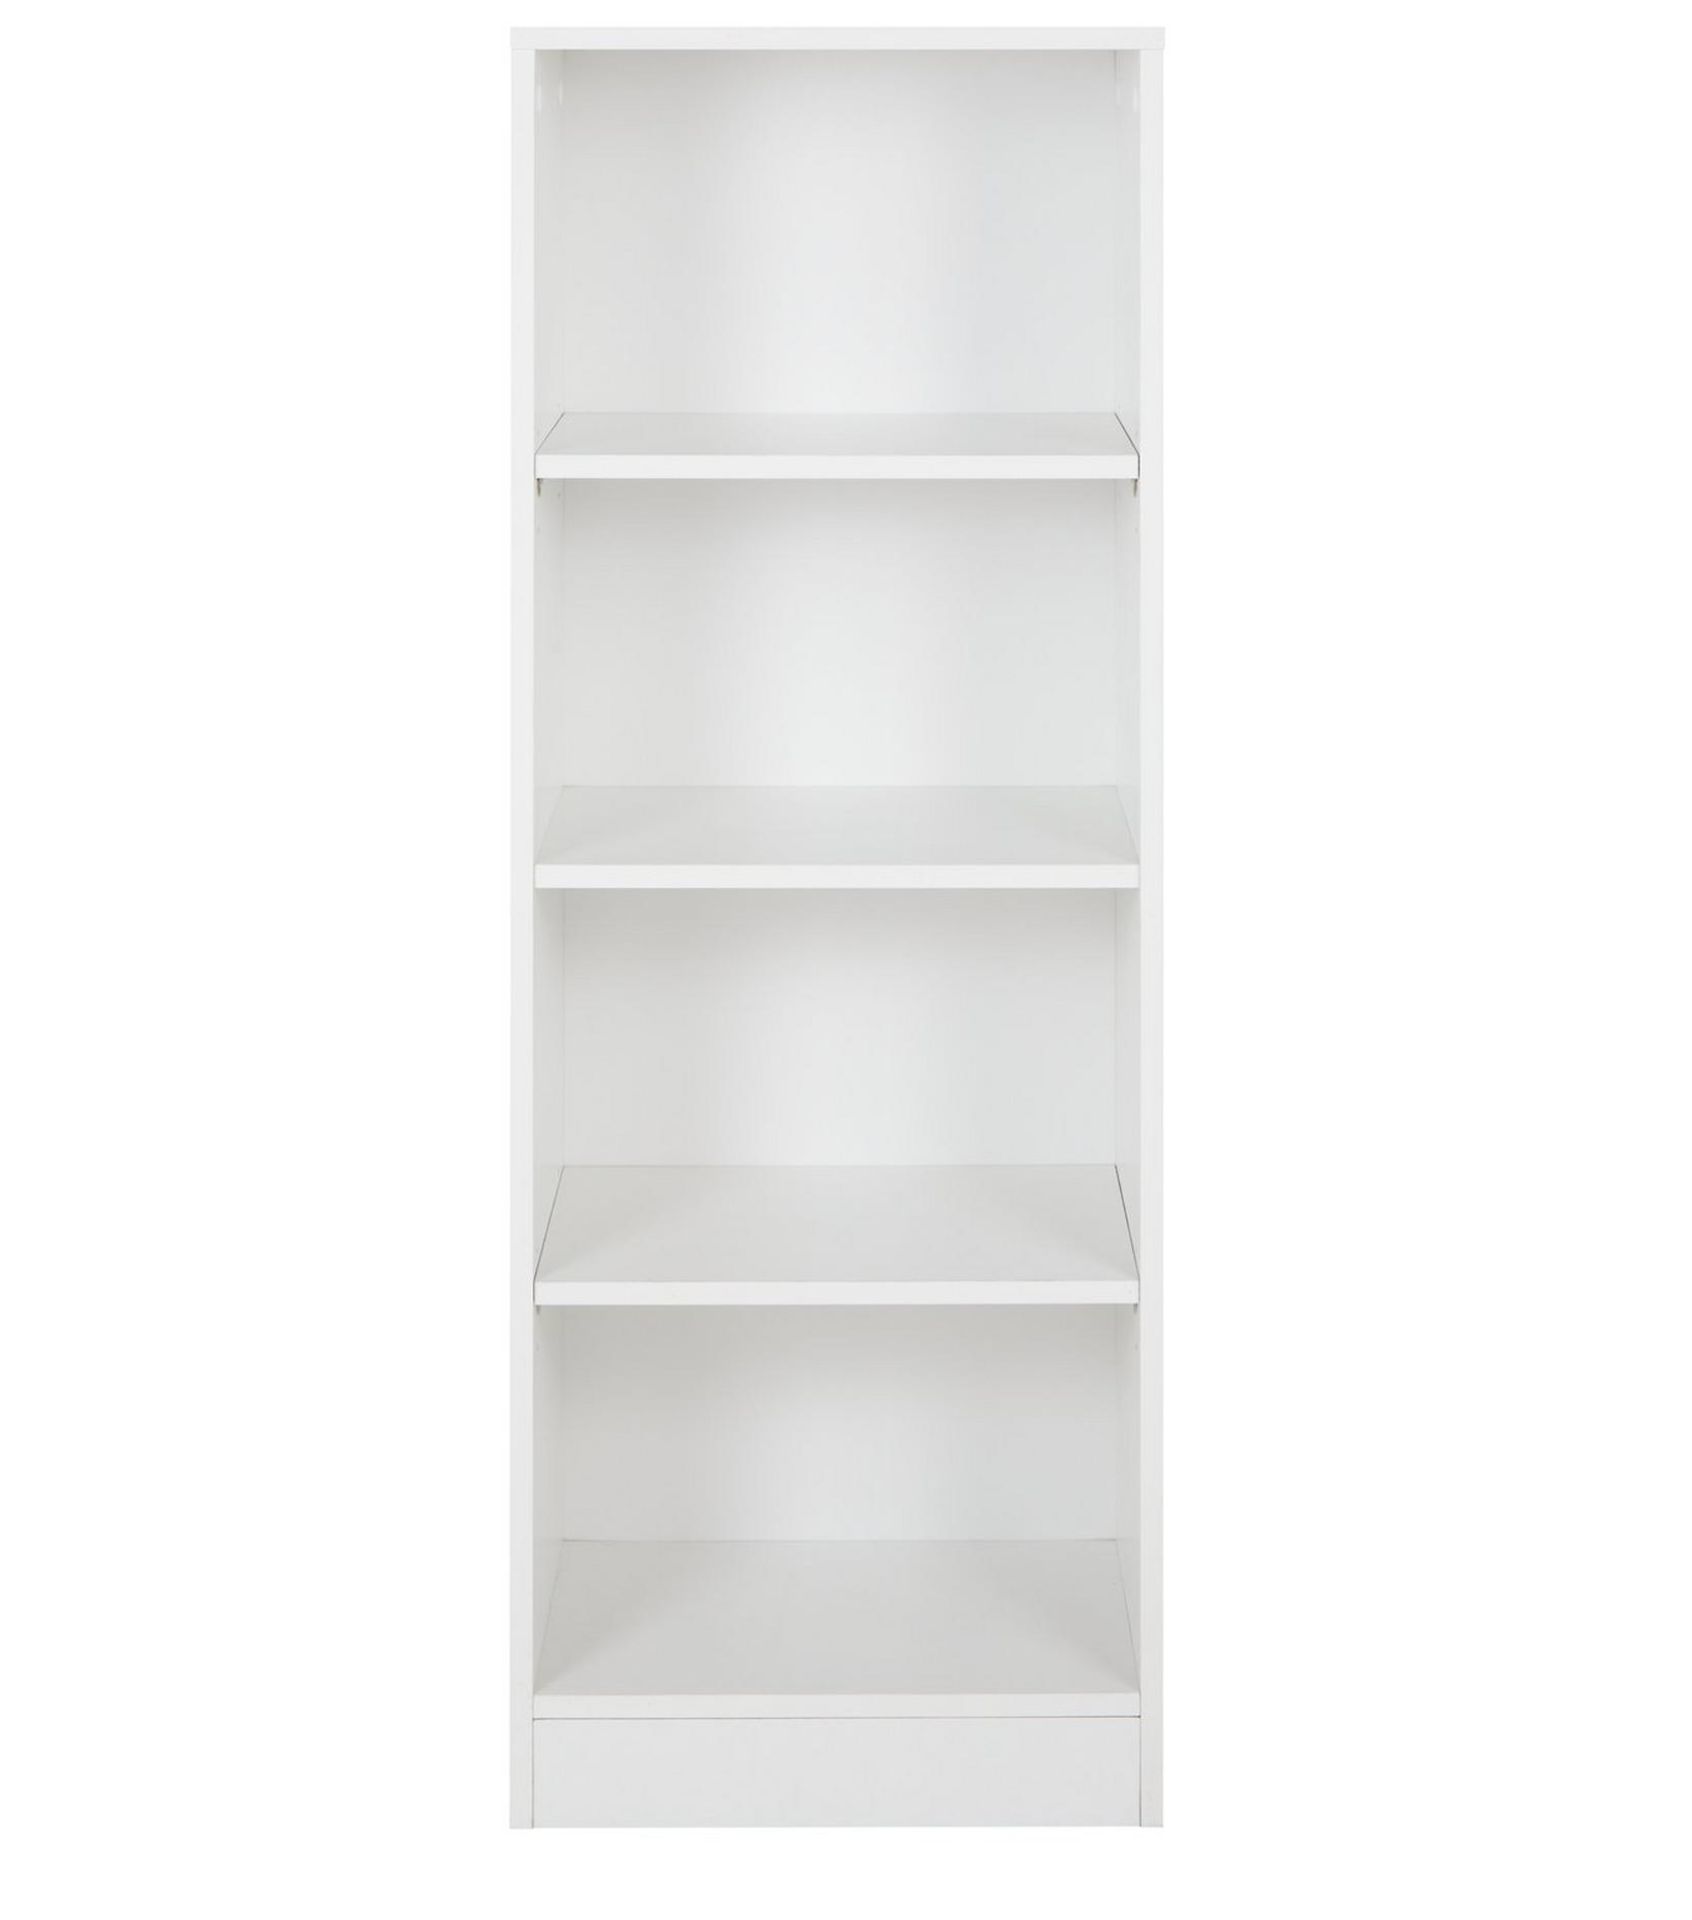 A1 PRODUCT NEW - METRO 3 PIECE STORGAGE BOOKCASE SET IN WHITE - RRP Ã‚Â£189 - Image 5 of 5